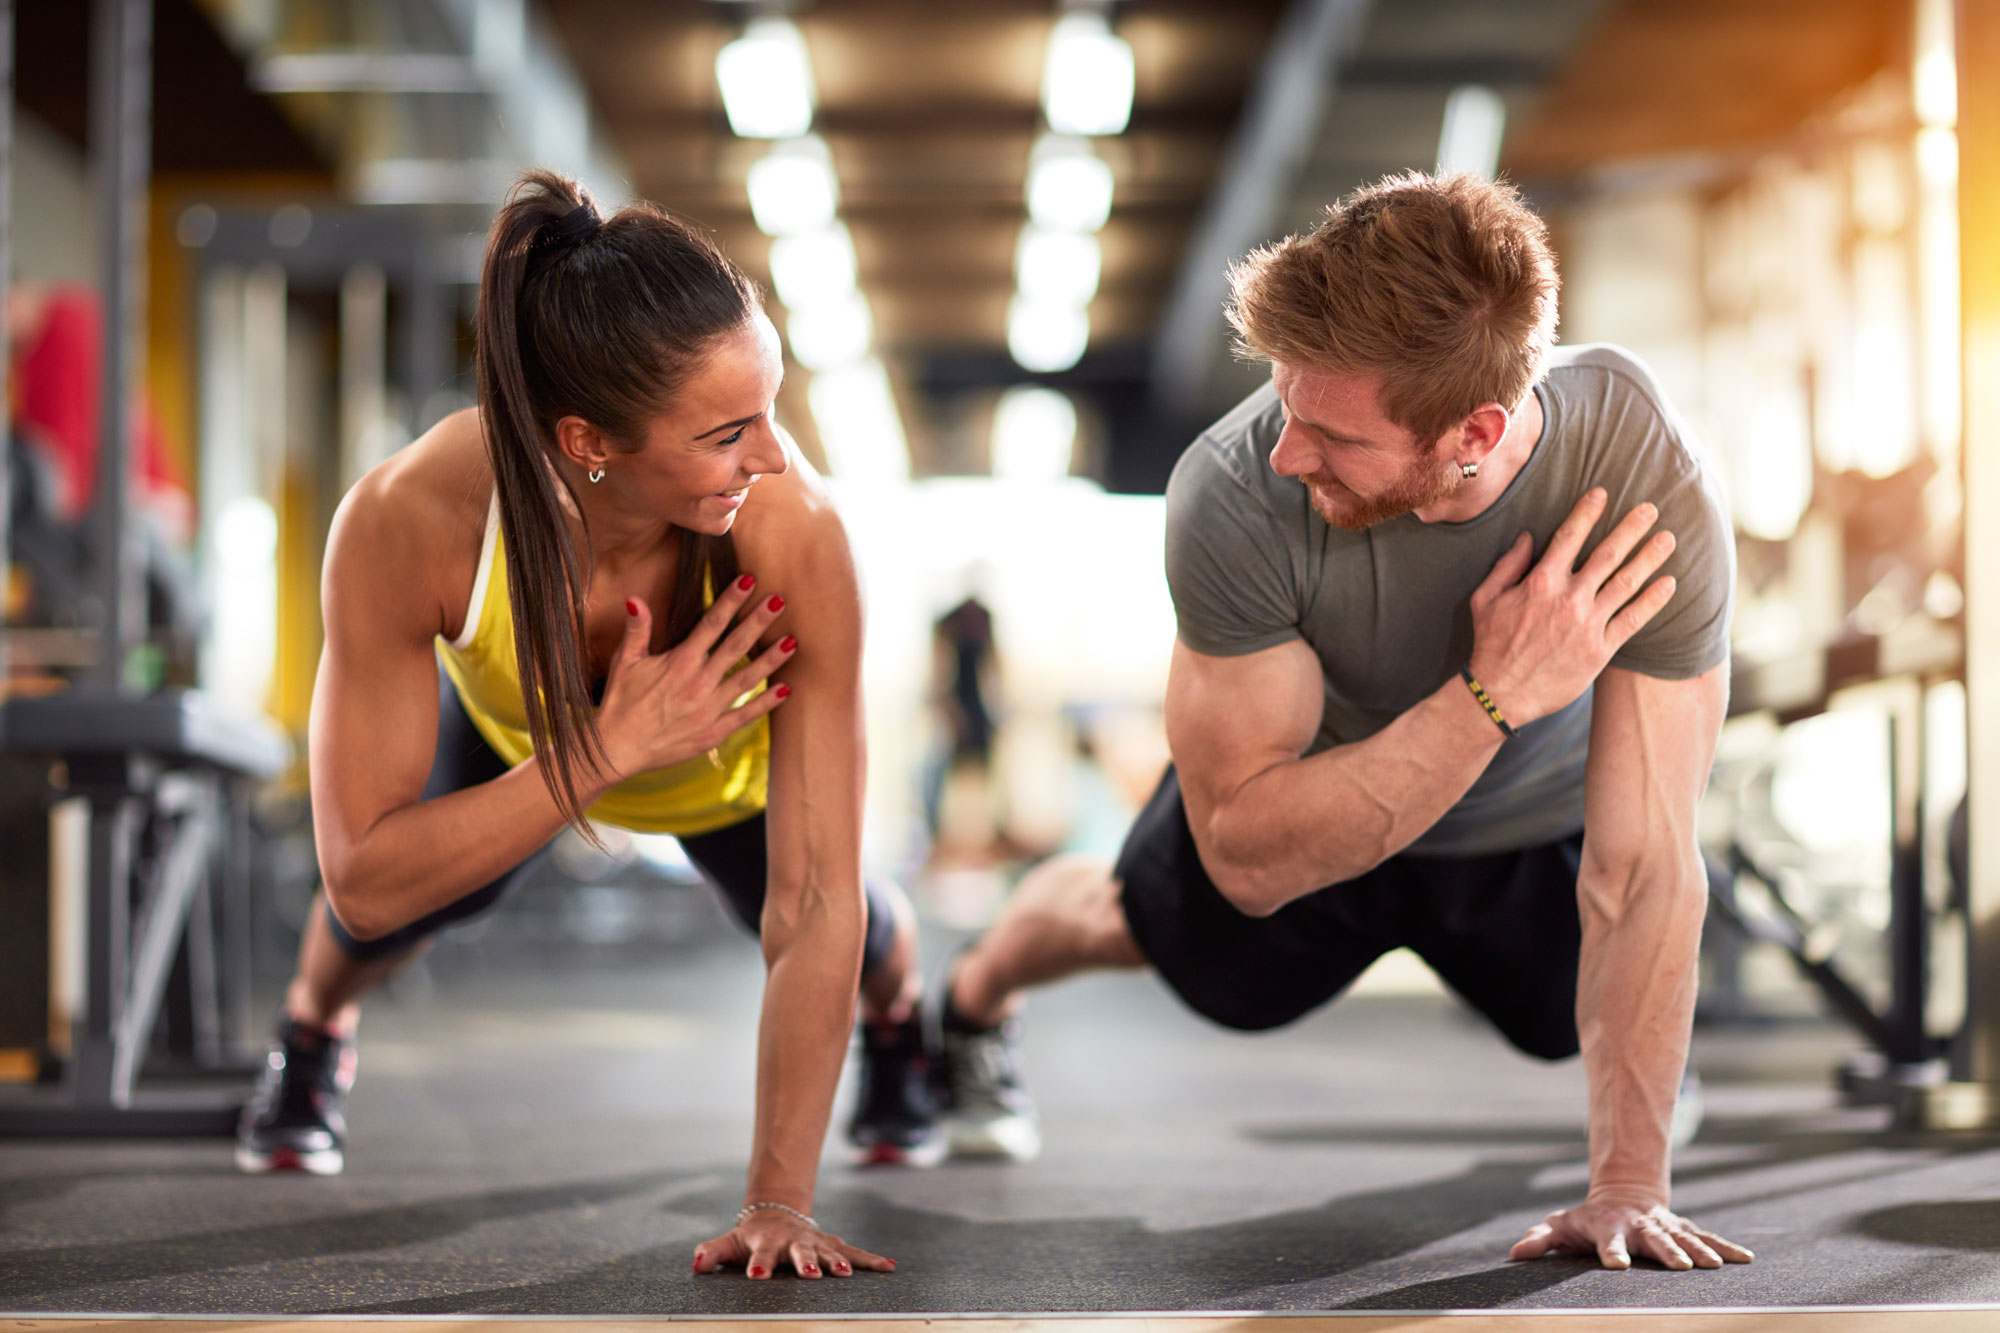 Fitness For 2? Selling Personal Training to Couples